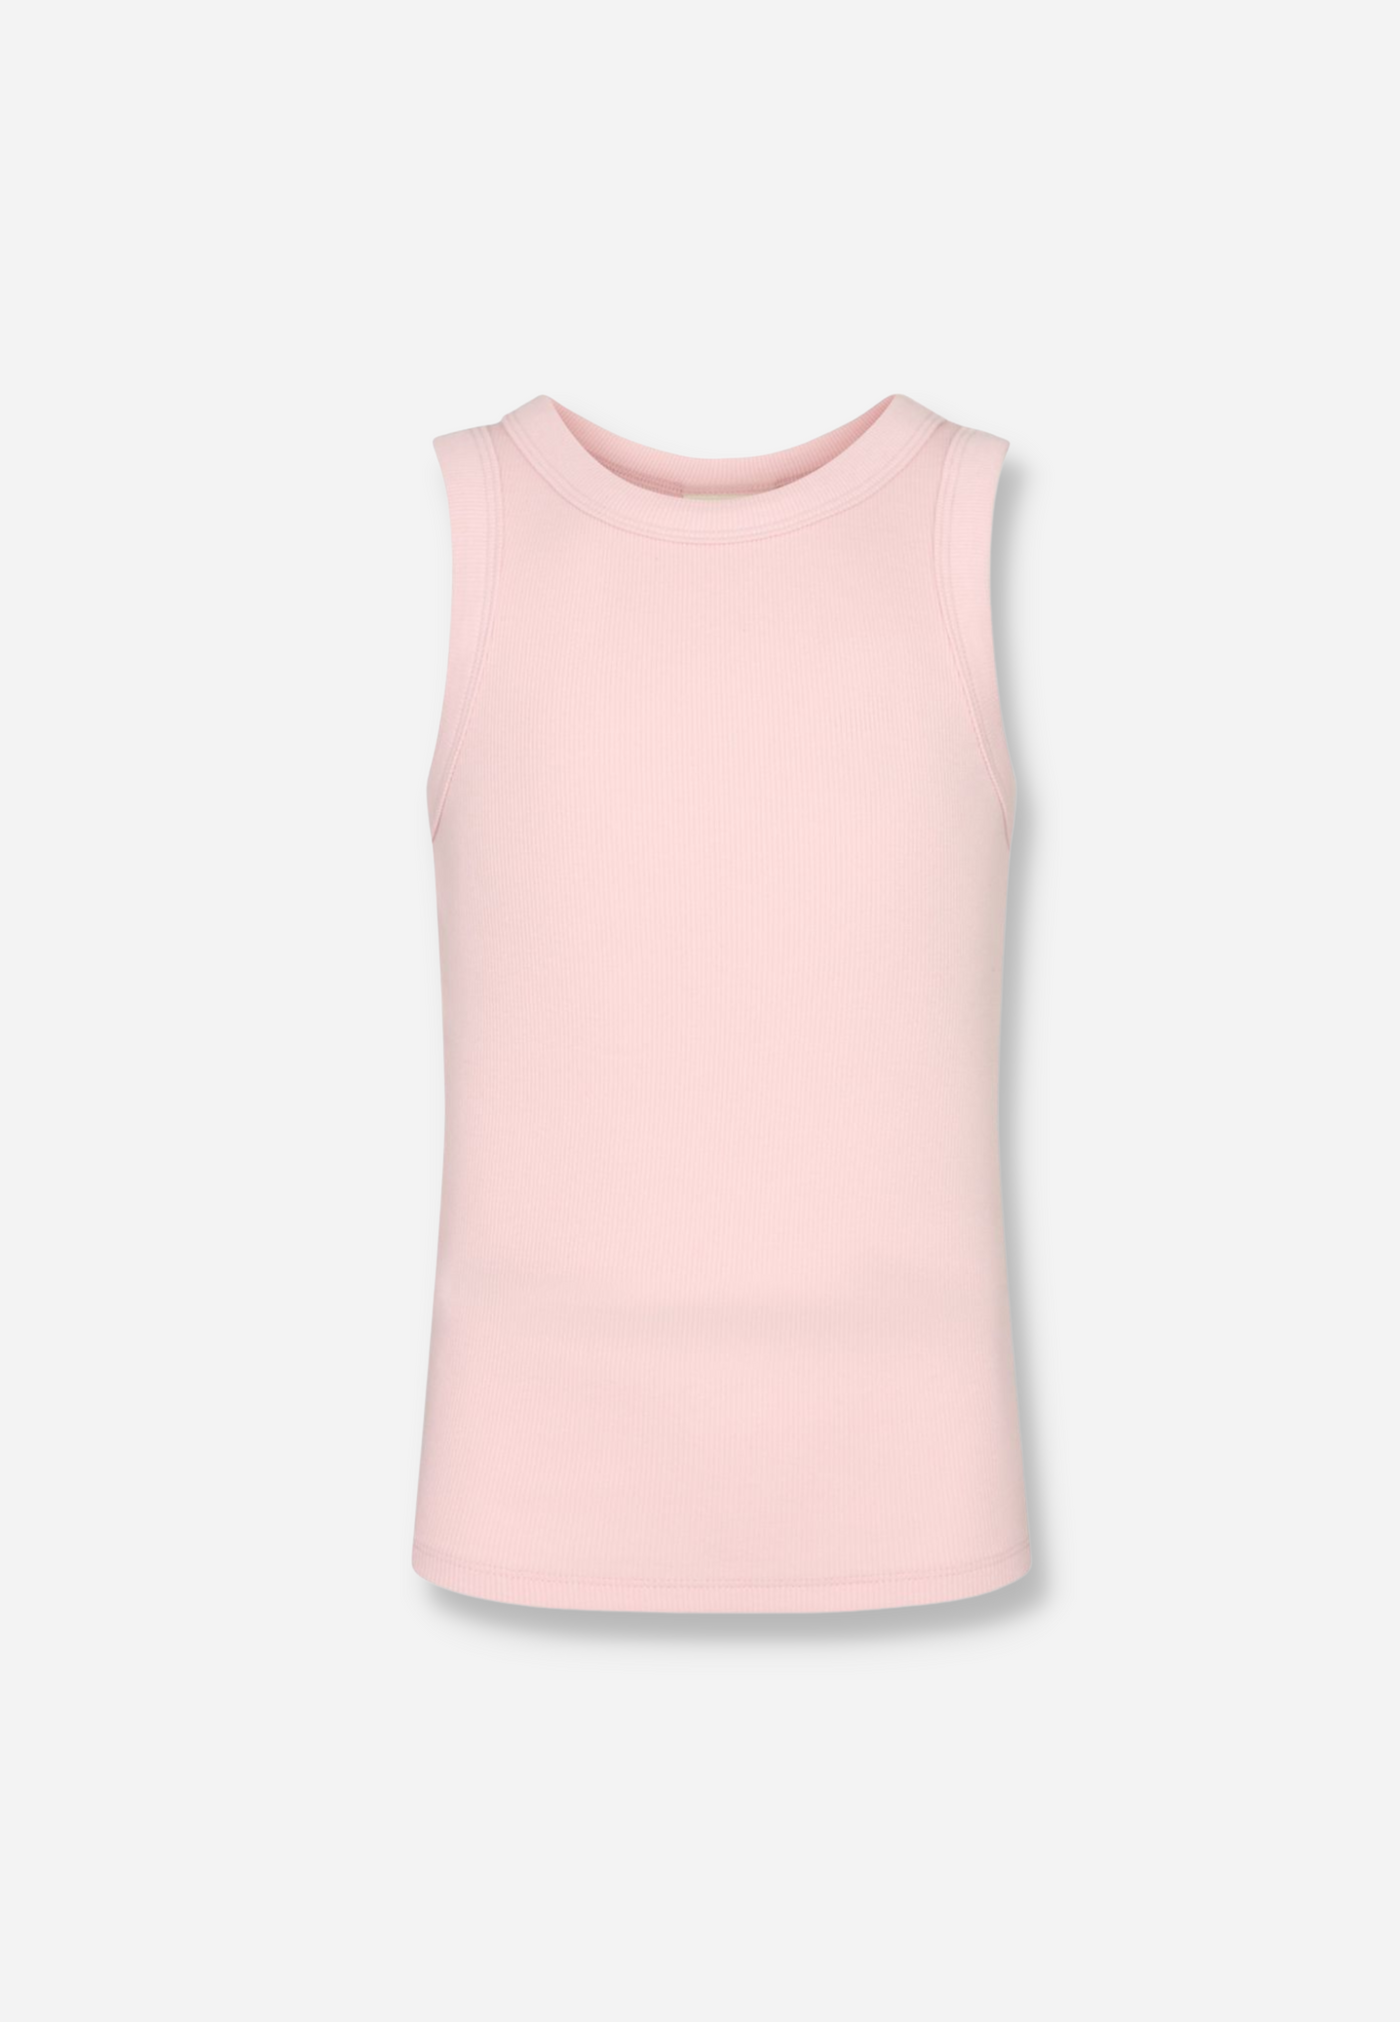 TOP - CORAL